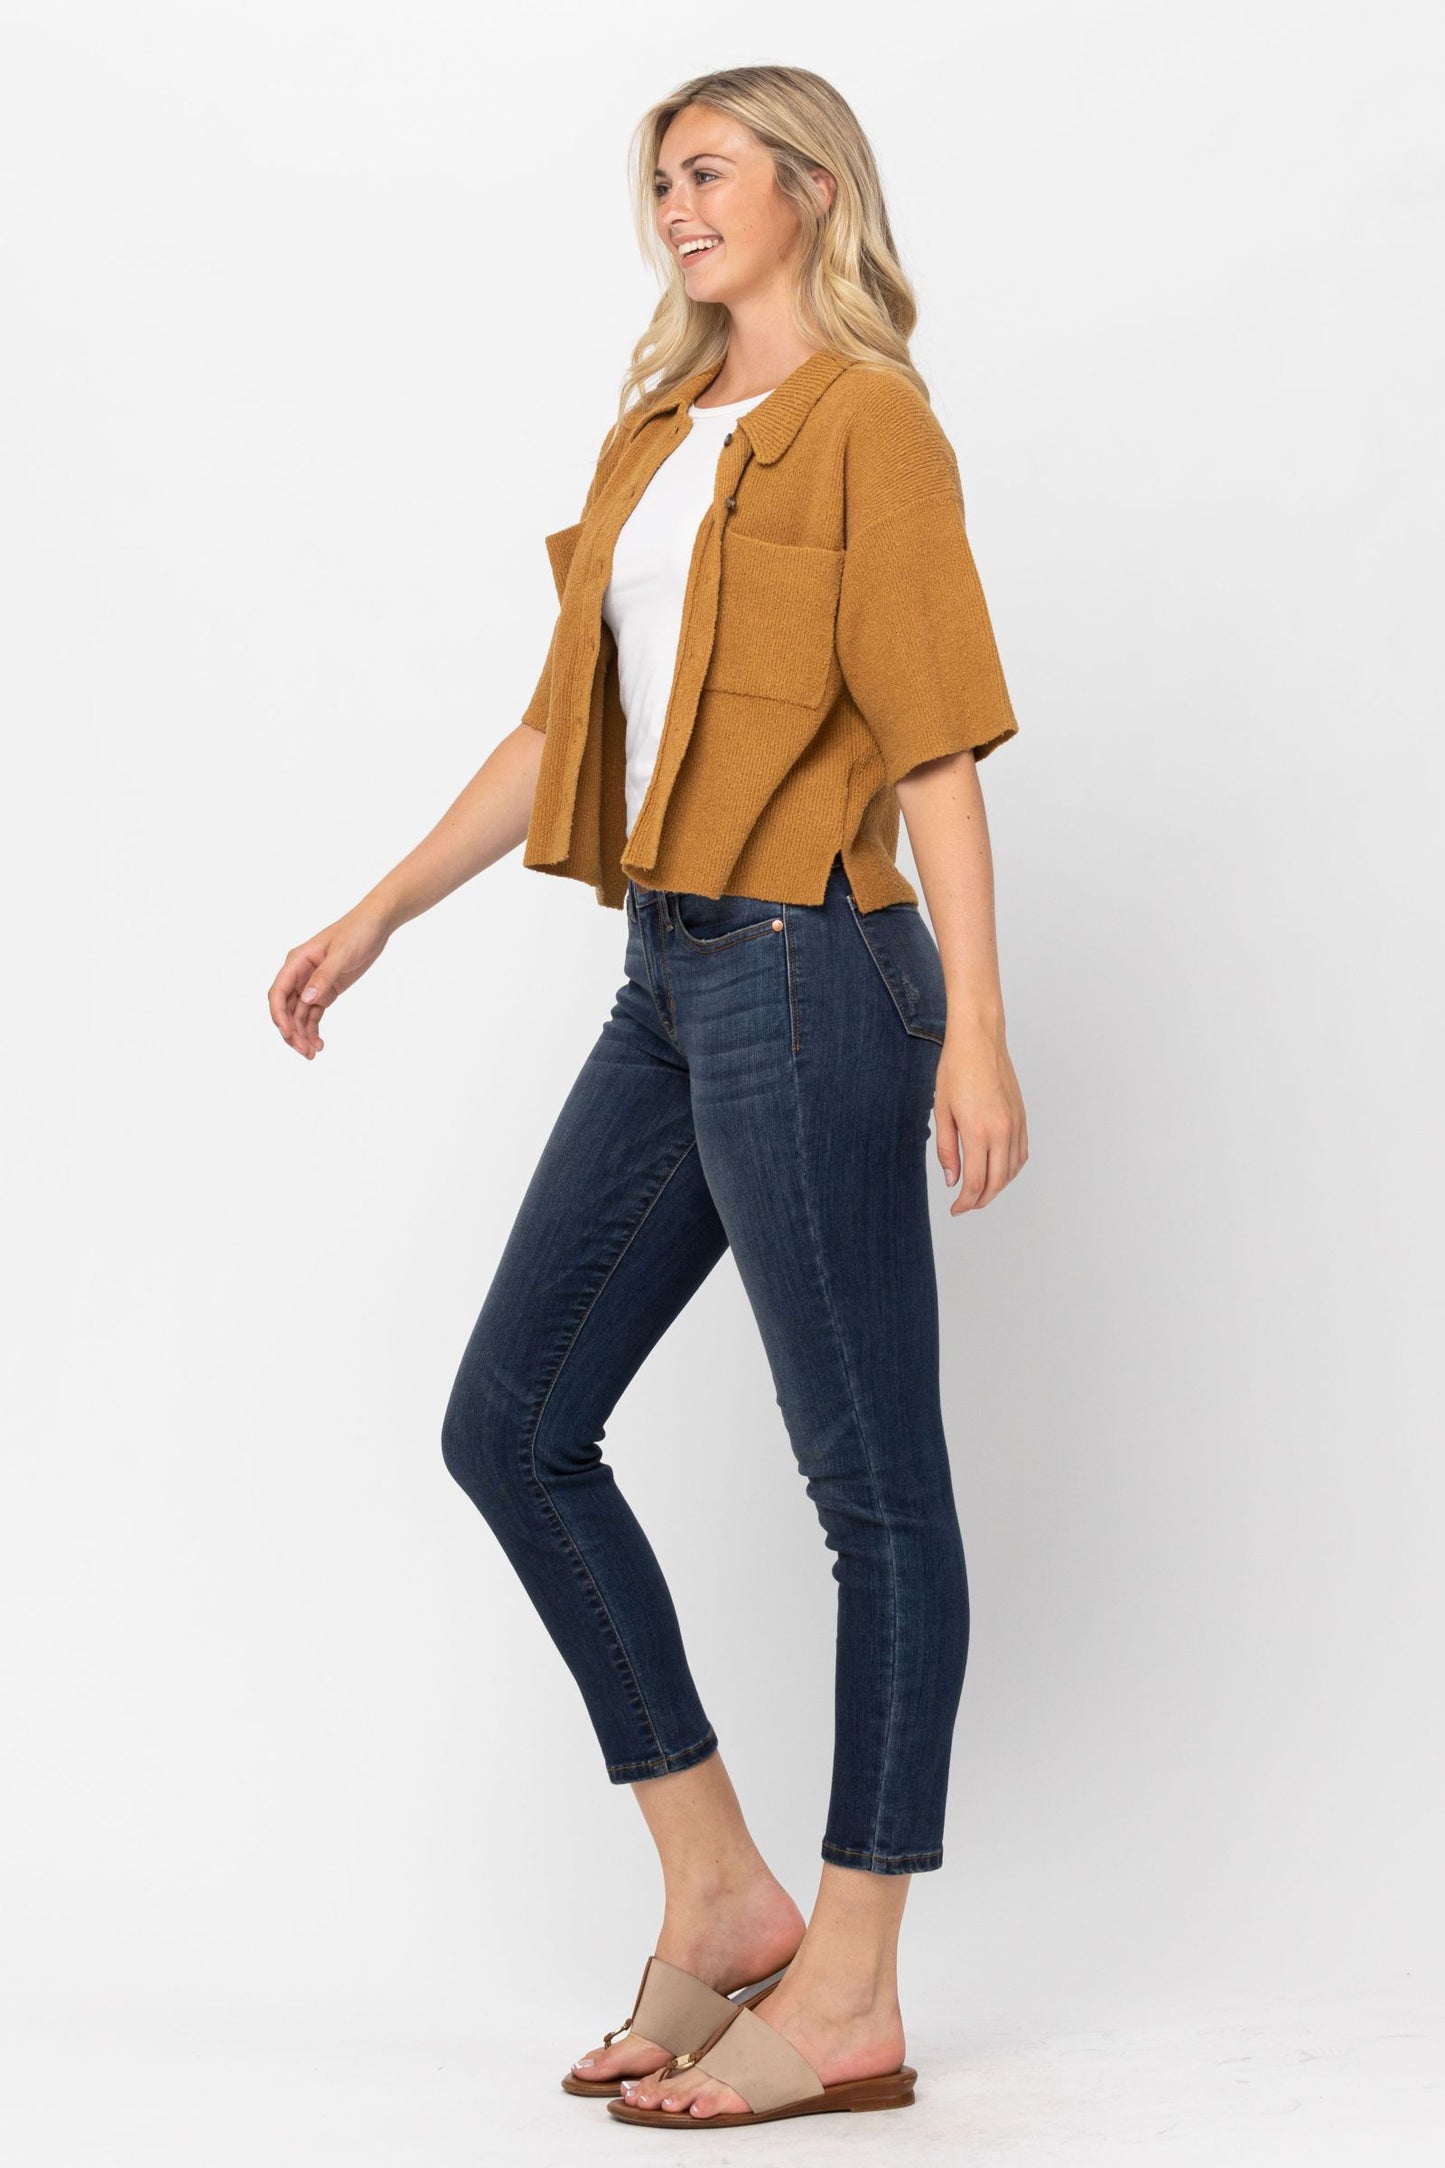 JUDY BLUE MID-RISE RELAXED FIT-2 INSEAM OPTIONS